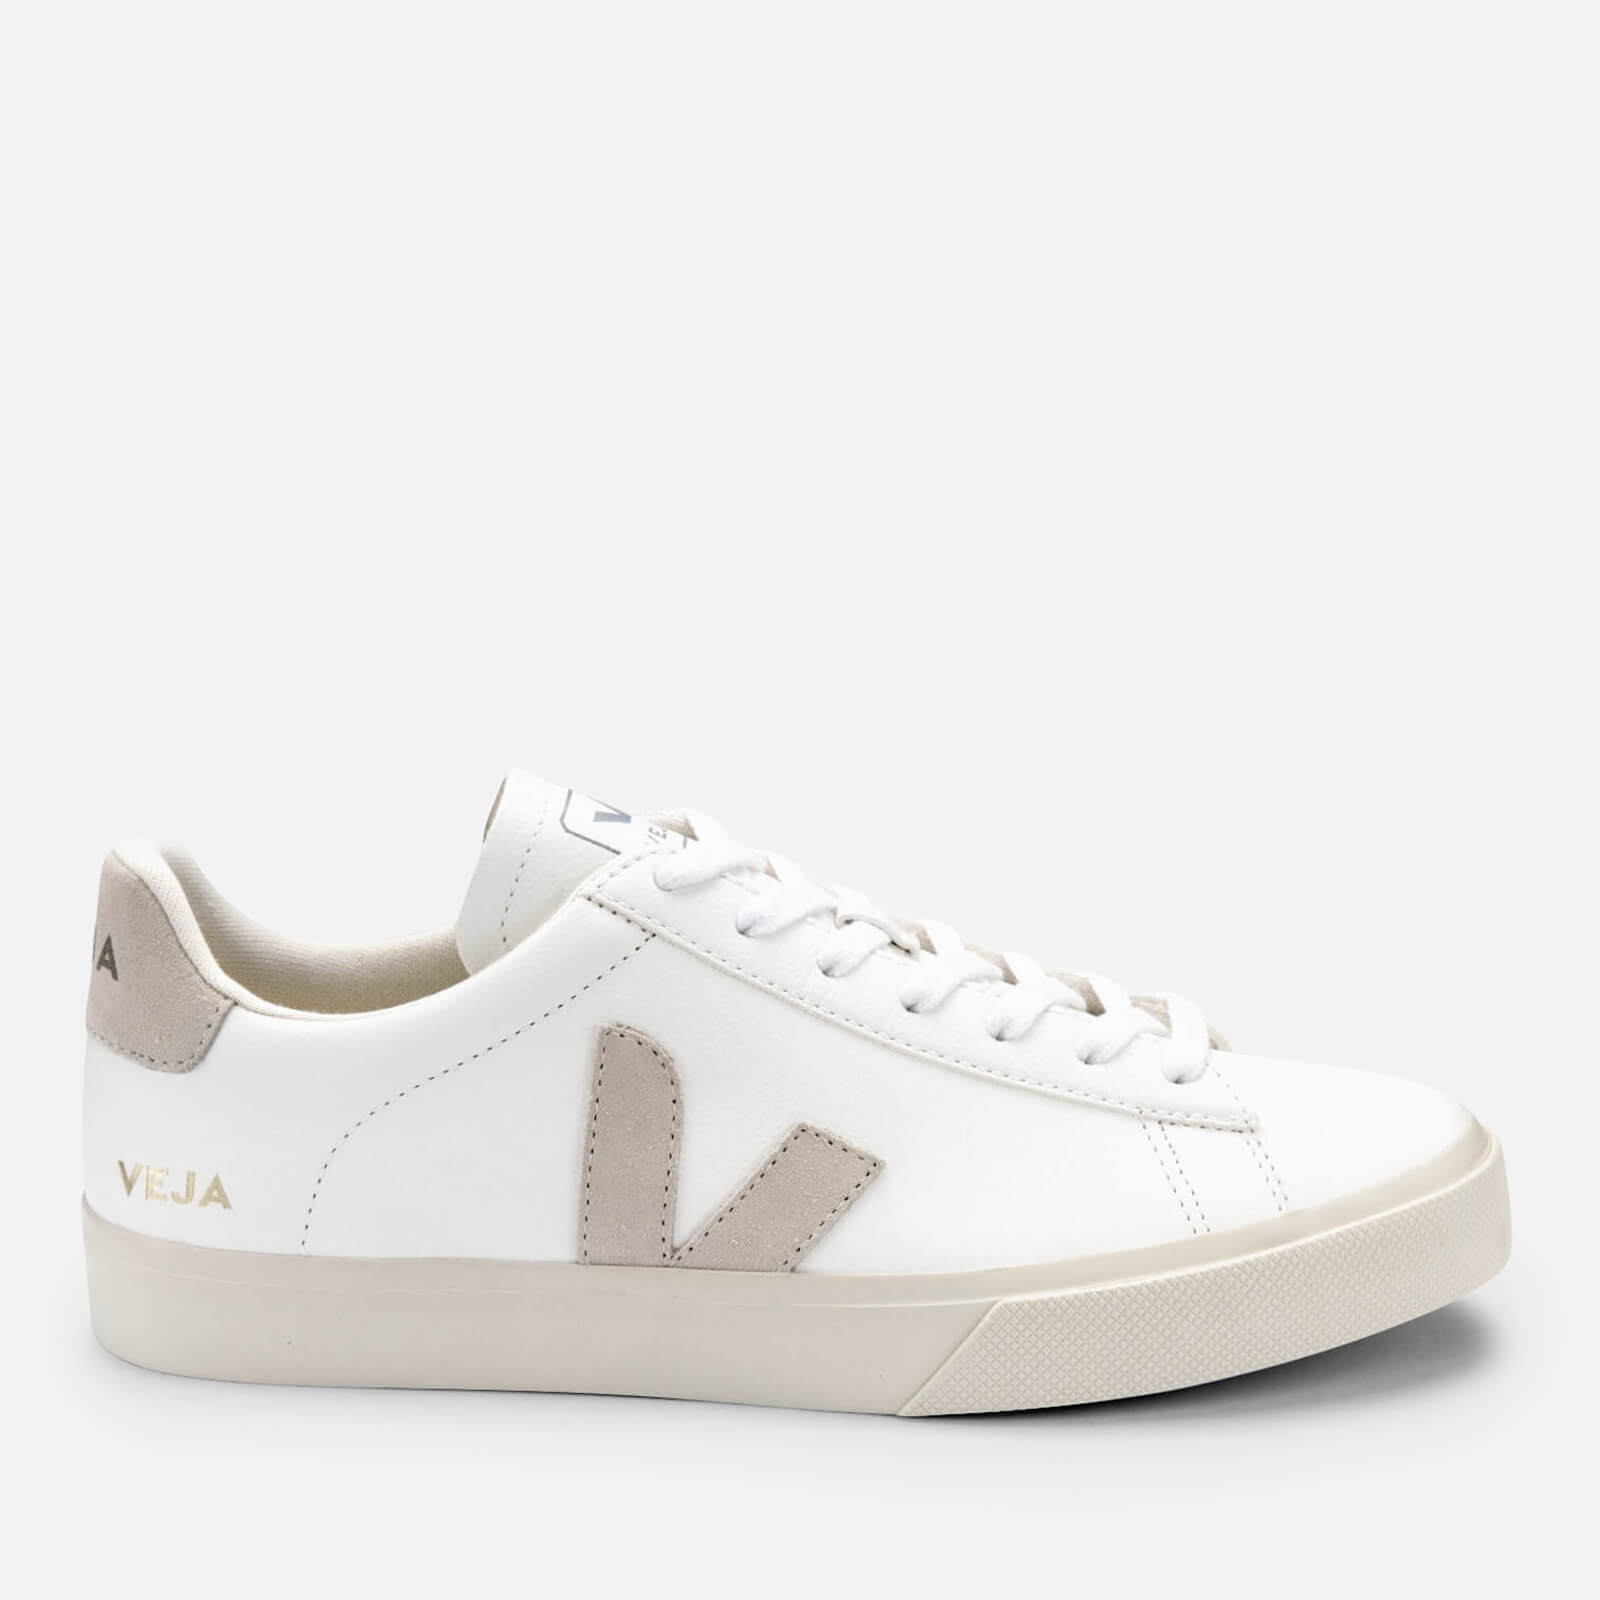 Veja Women’s Campo Chrome Free Leather Trainers - Extra White/Natural